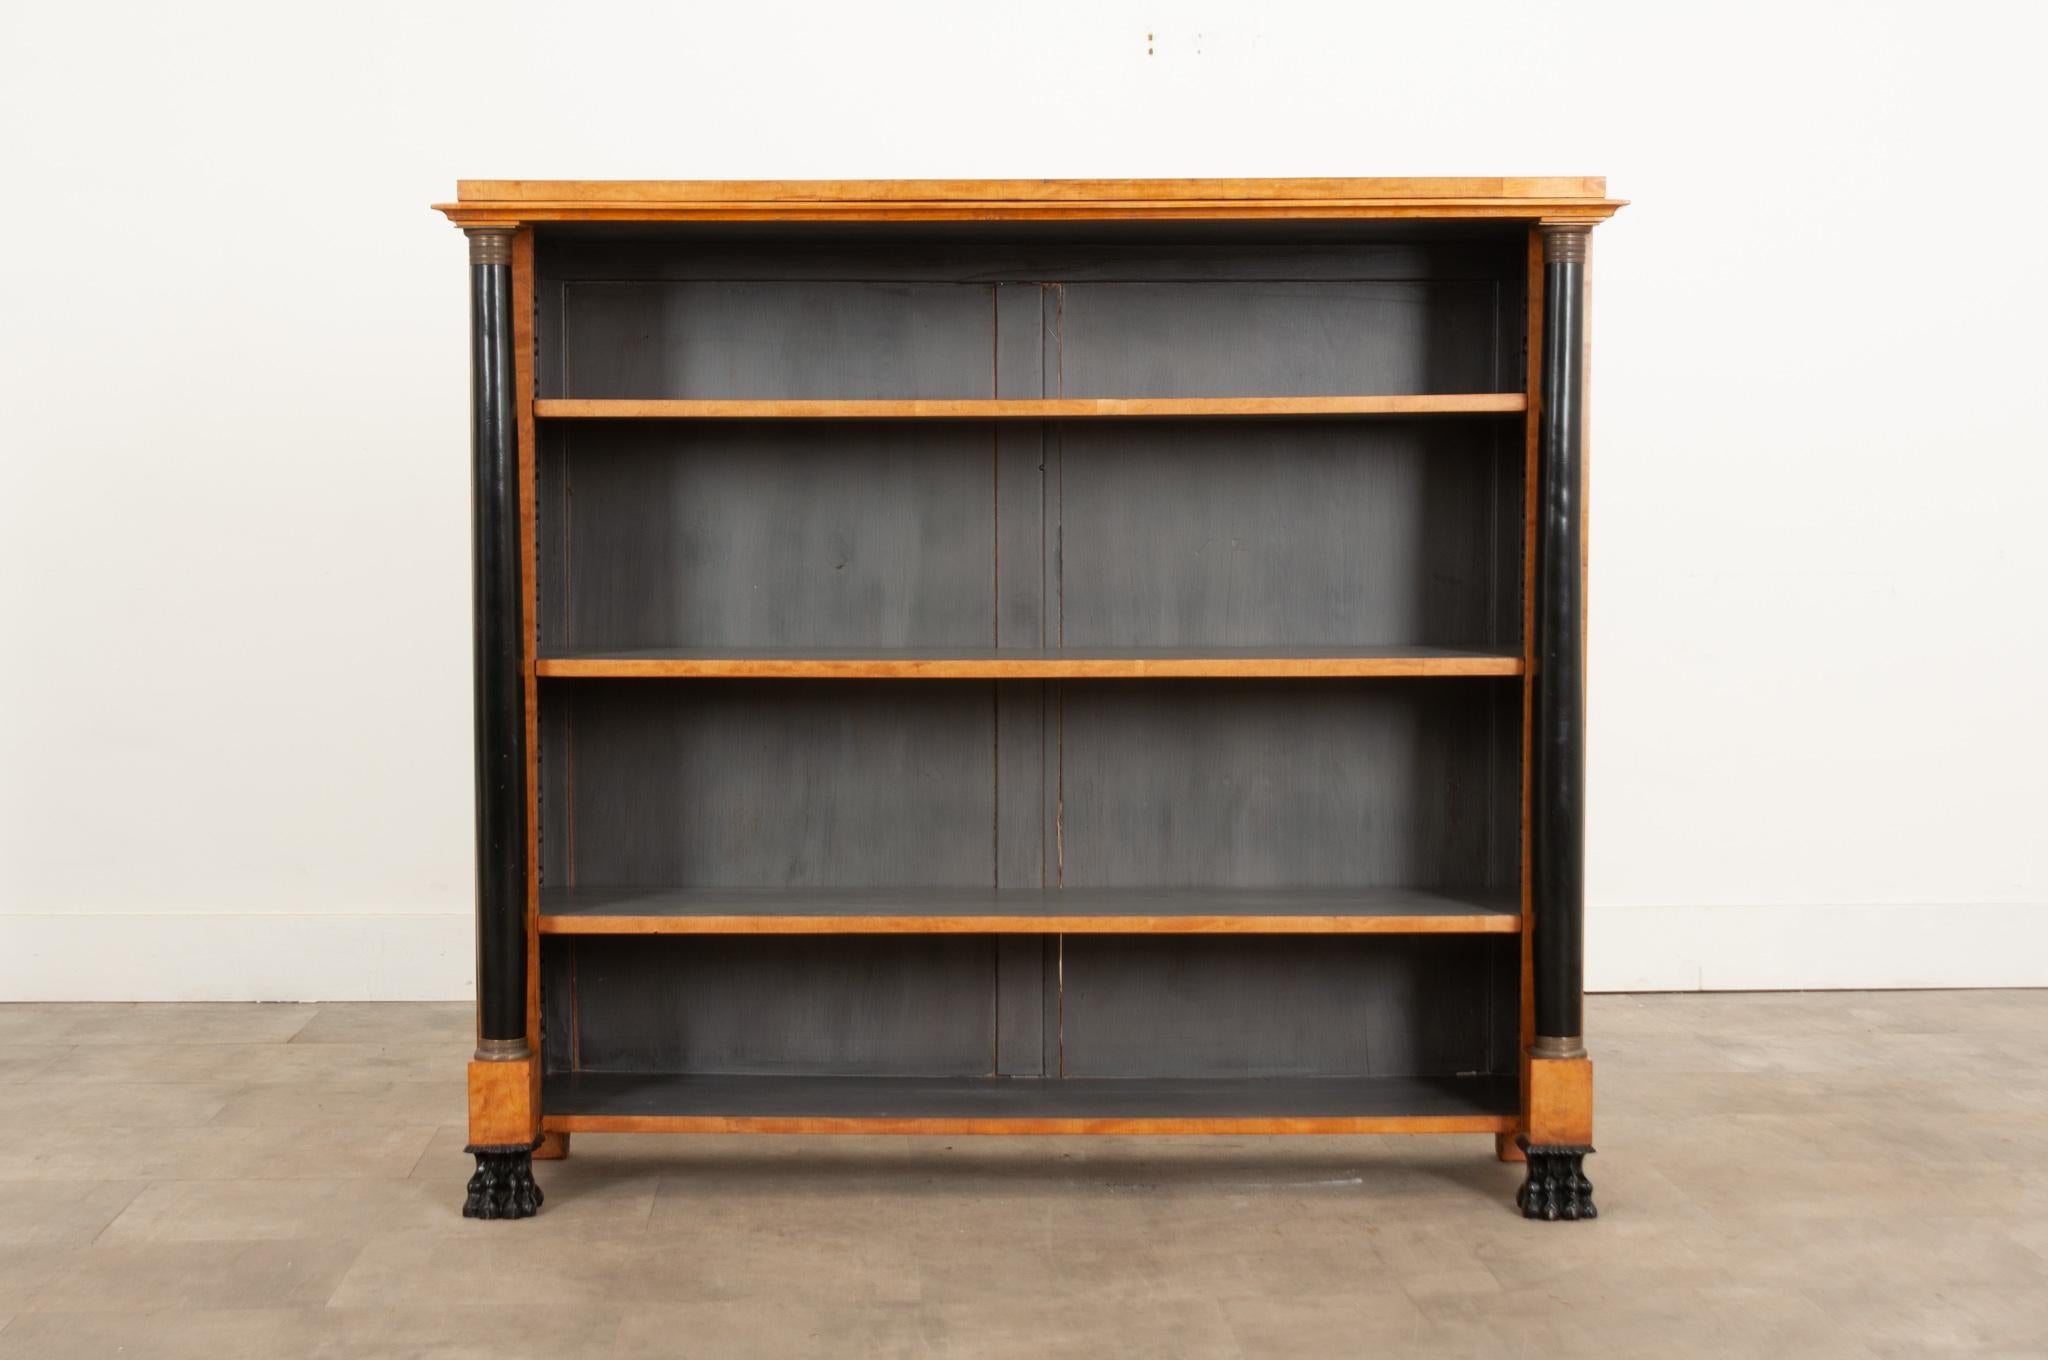 An early 19th century French Biedermeier polished satinwood bookcase with ebony accents. This attractive open bookcase, circa 1830 in date, has a stunning pair of ebonized columns with decorative brass capitelli encircled with neoclassical patterns